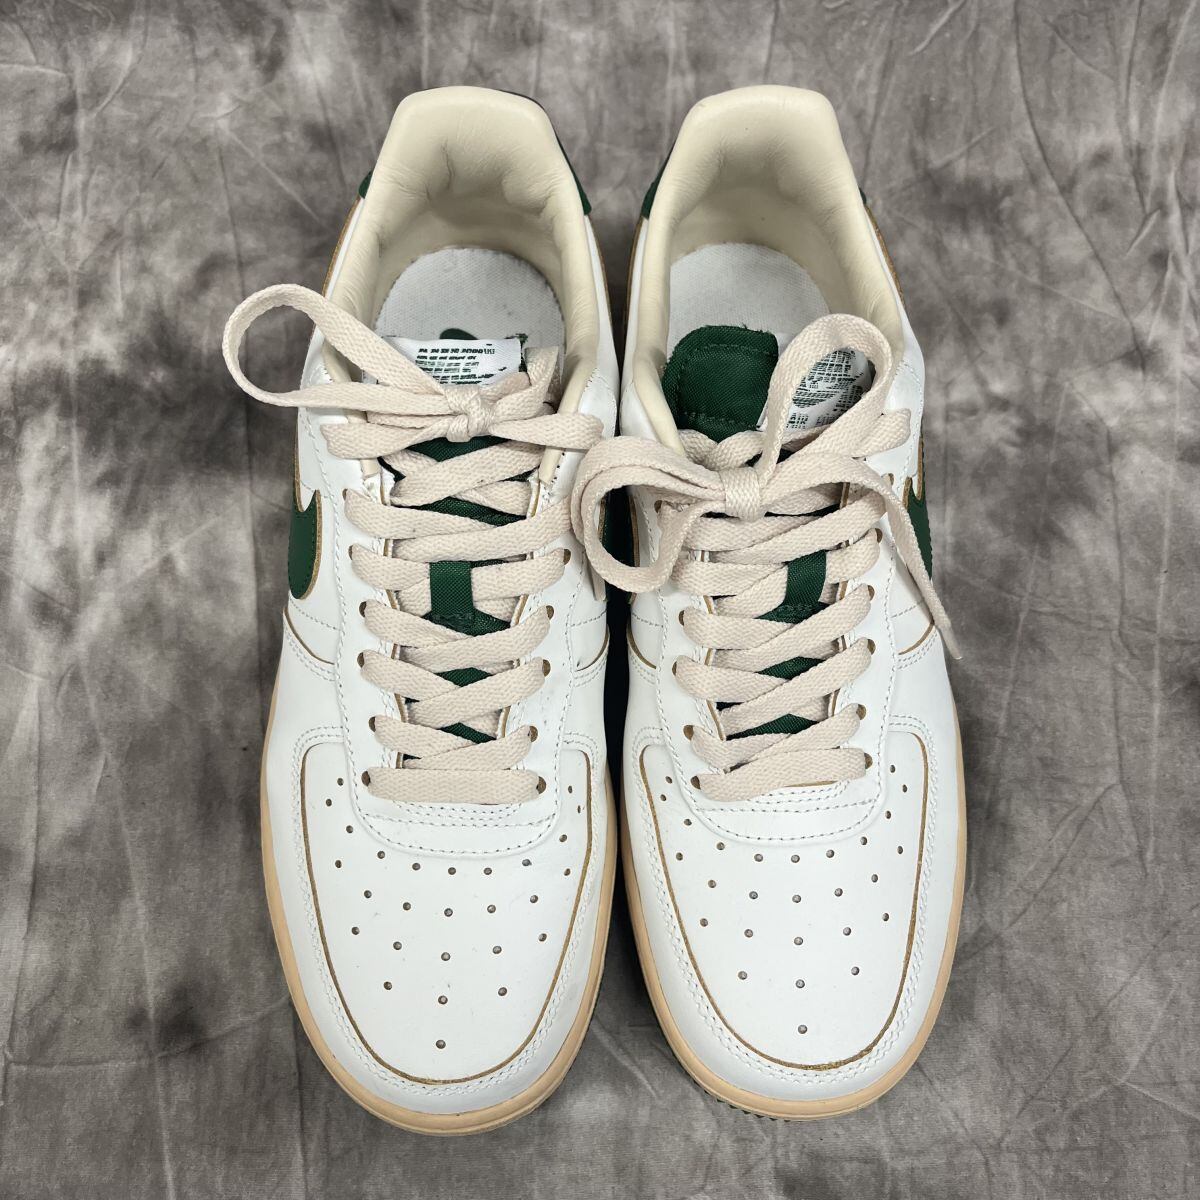 NIKE/ナイキ WMNS AIR FORCE 1 LOW '07 LV8 Green and Muslin ...